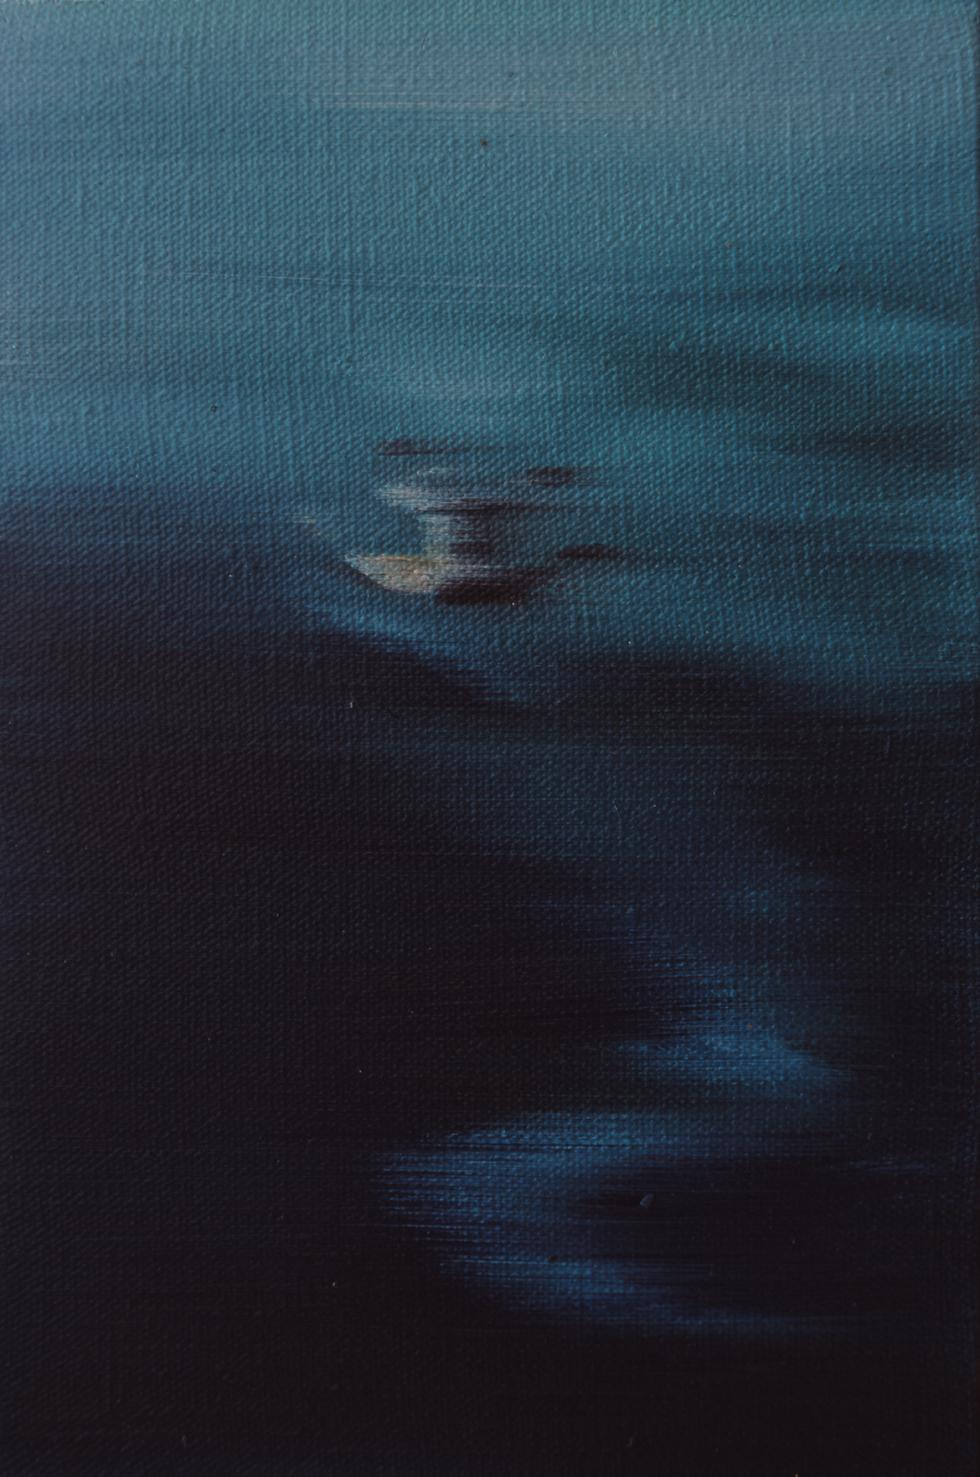 textured Figurative painting- Water Series No.4 by He Wenjue 
Dimension : 30 x 20cm 
Material :oil on canvas 
Date: 2009 

About Water Series 
He Wenjue grew up in Hunan province, China, where the tributaries of the Xiangjiang River surround almost